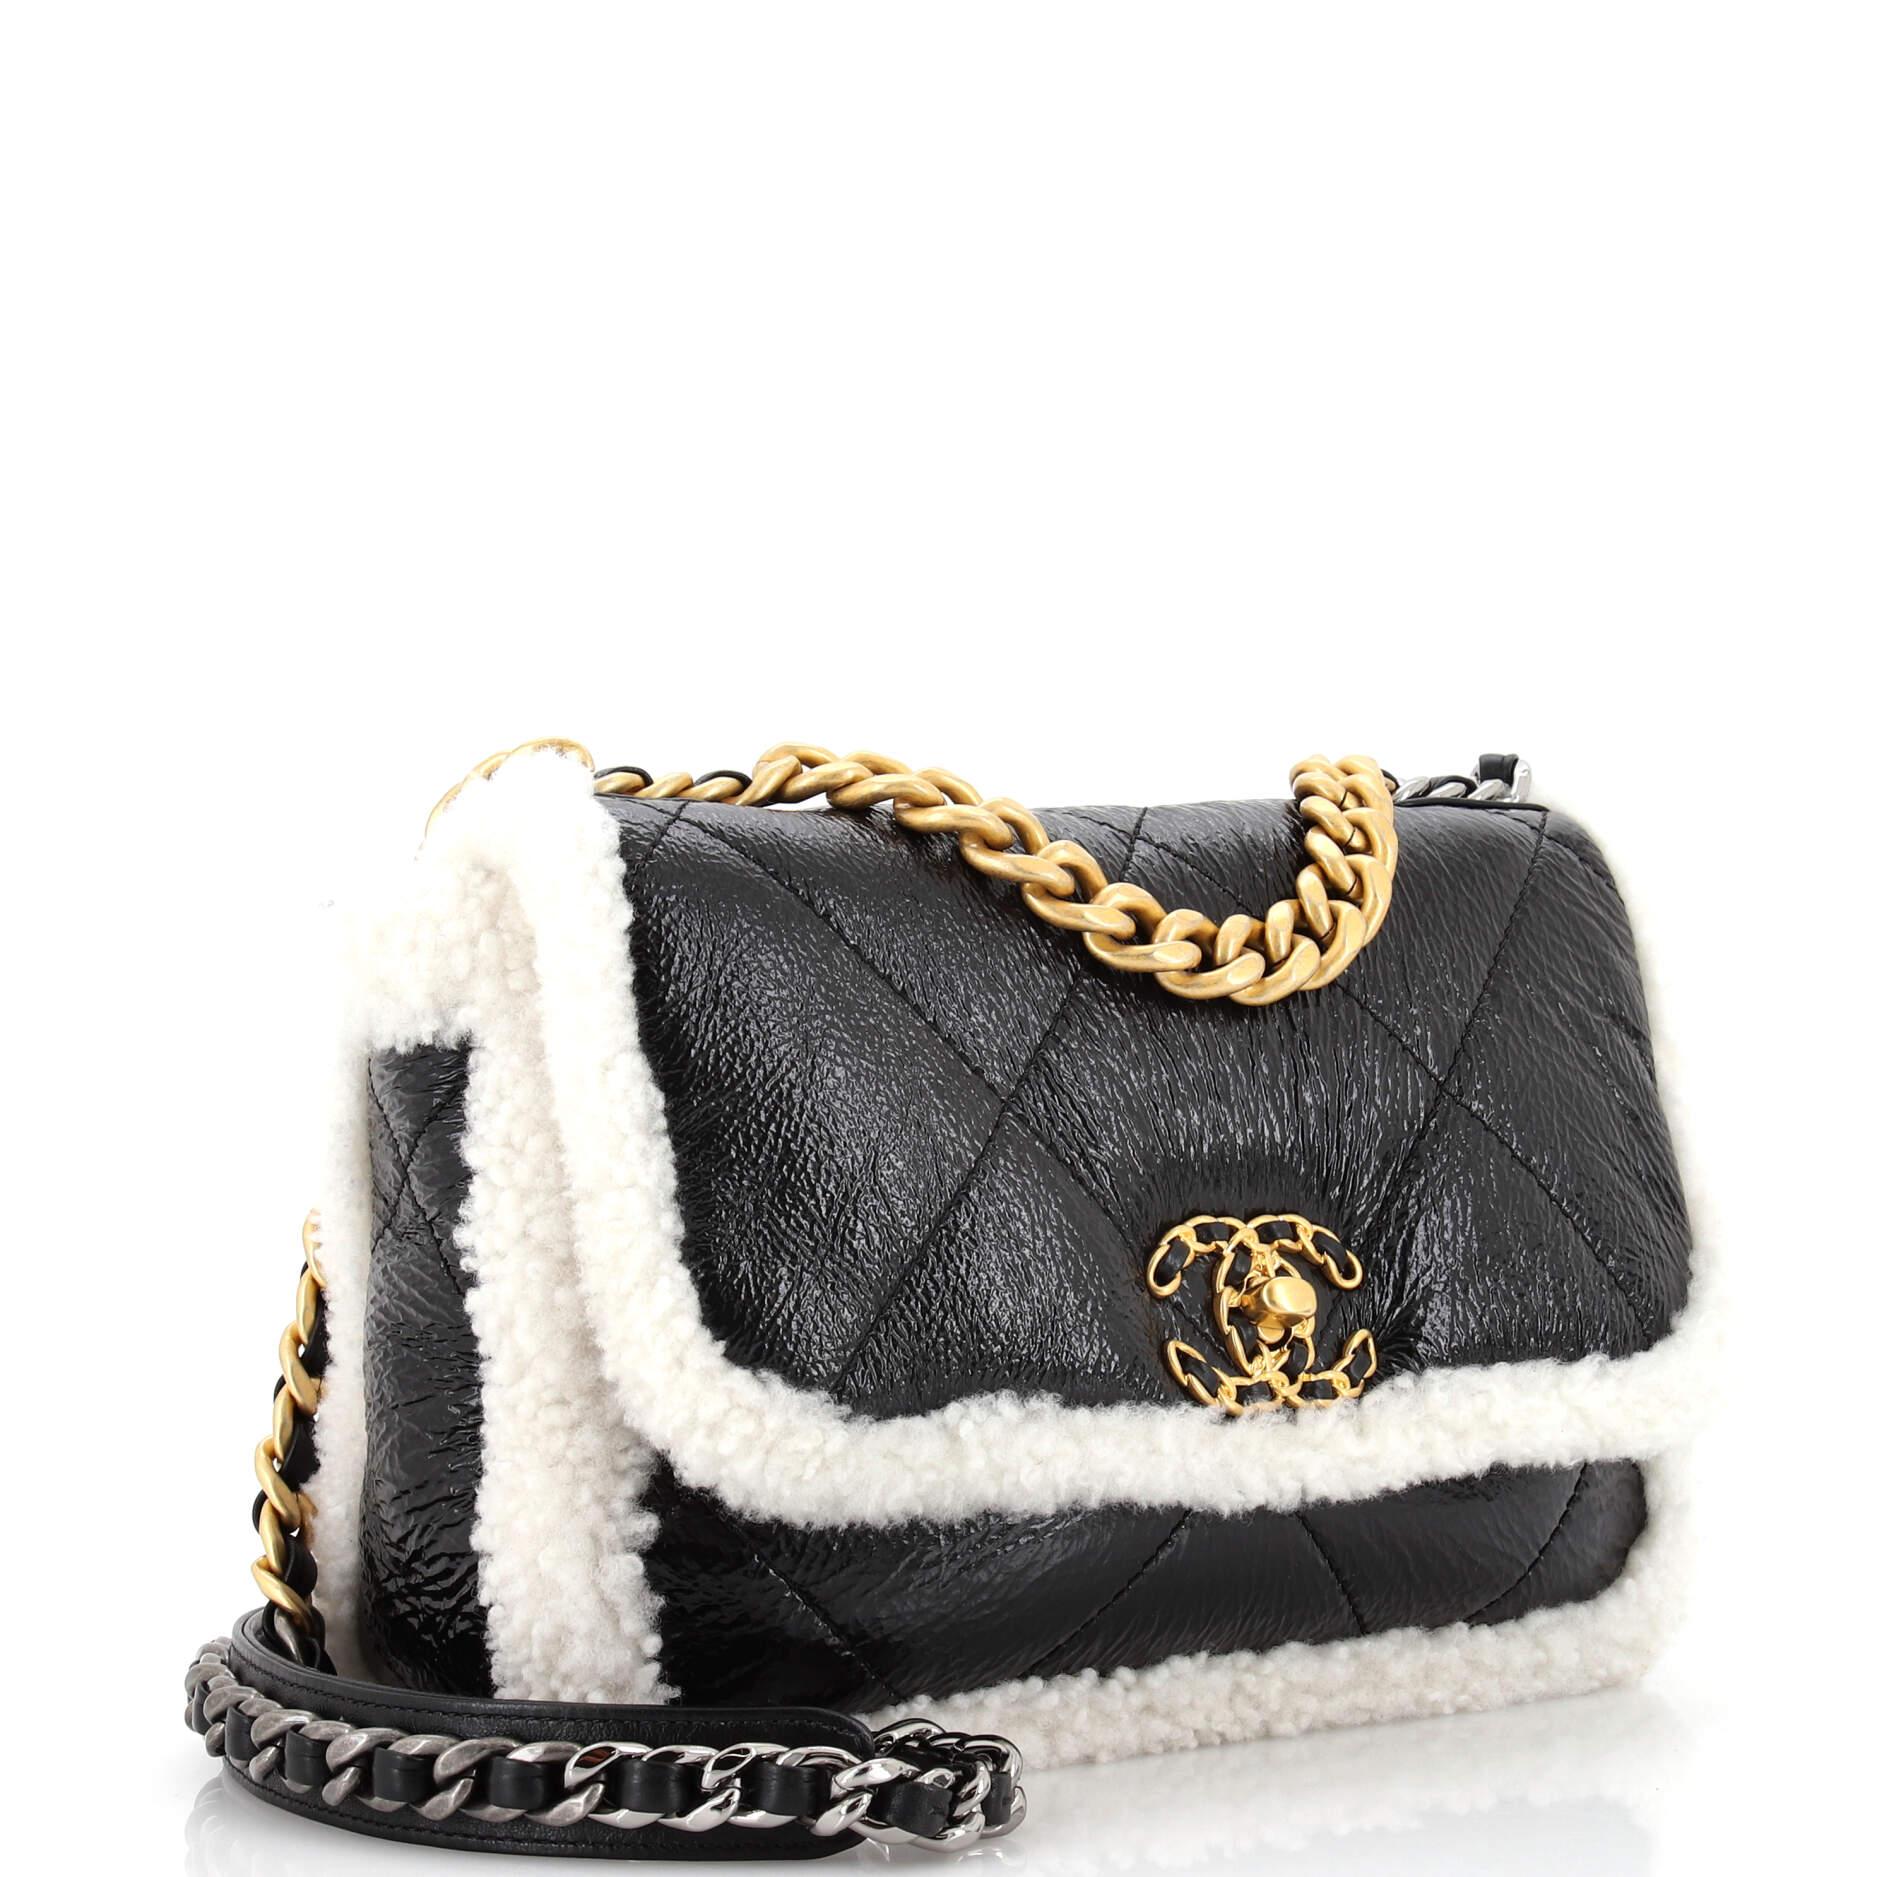 Chanel White Shearling Flap Bag - 5 For Sale on 1stDibs